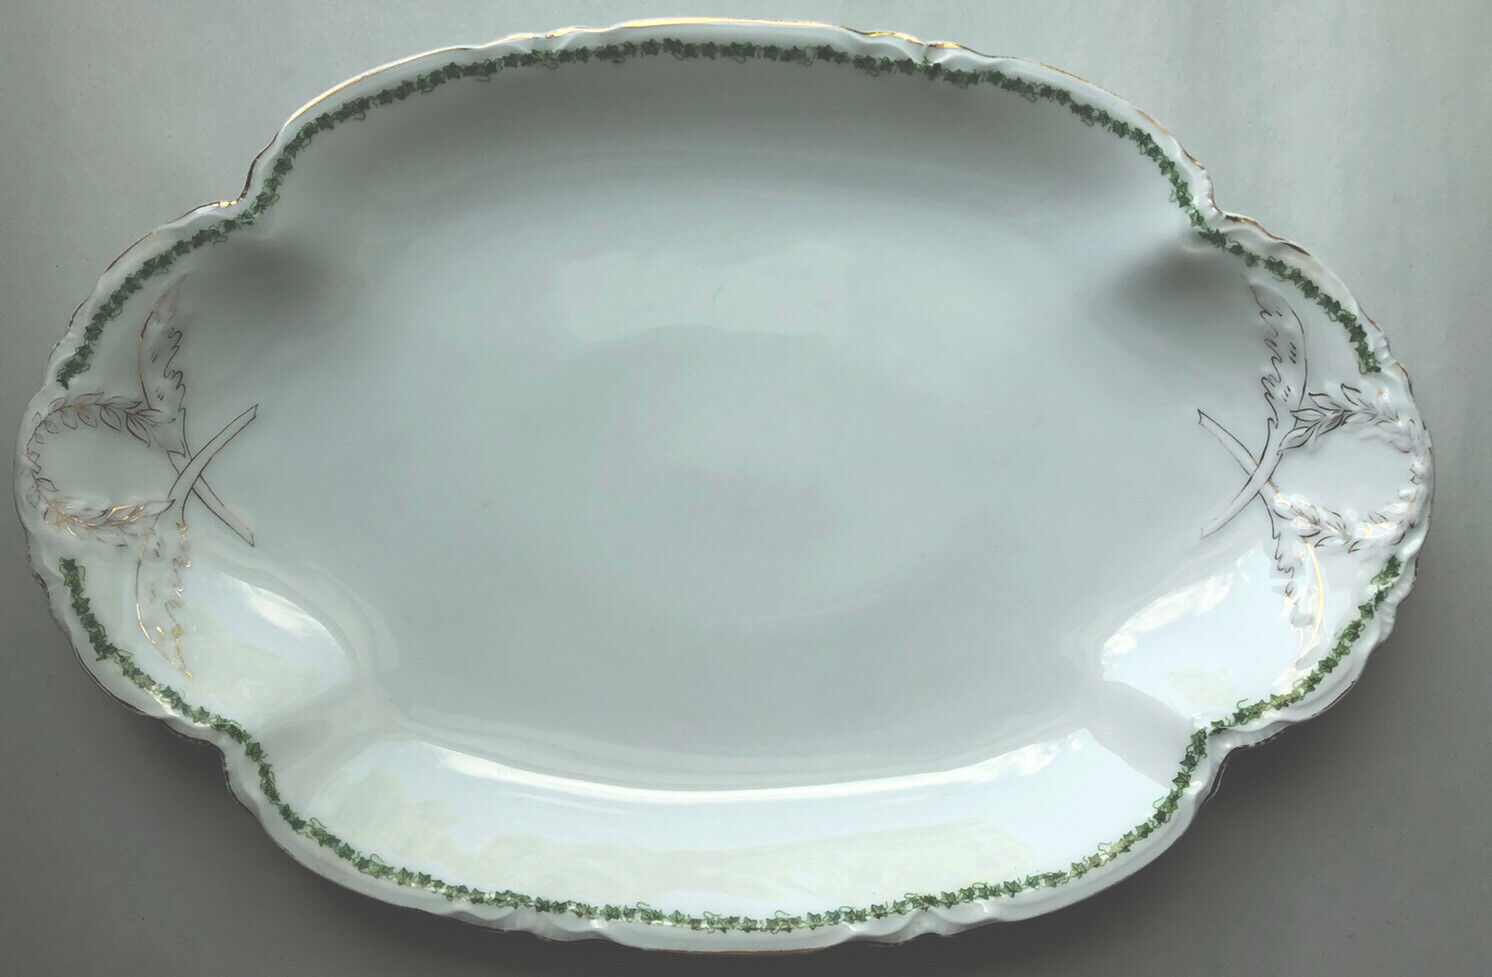 M.W. & CO. ROYAL SAXONY CHINA BAND of GREEN IVY on EDGE 16” Oval serving platter